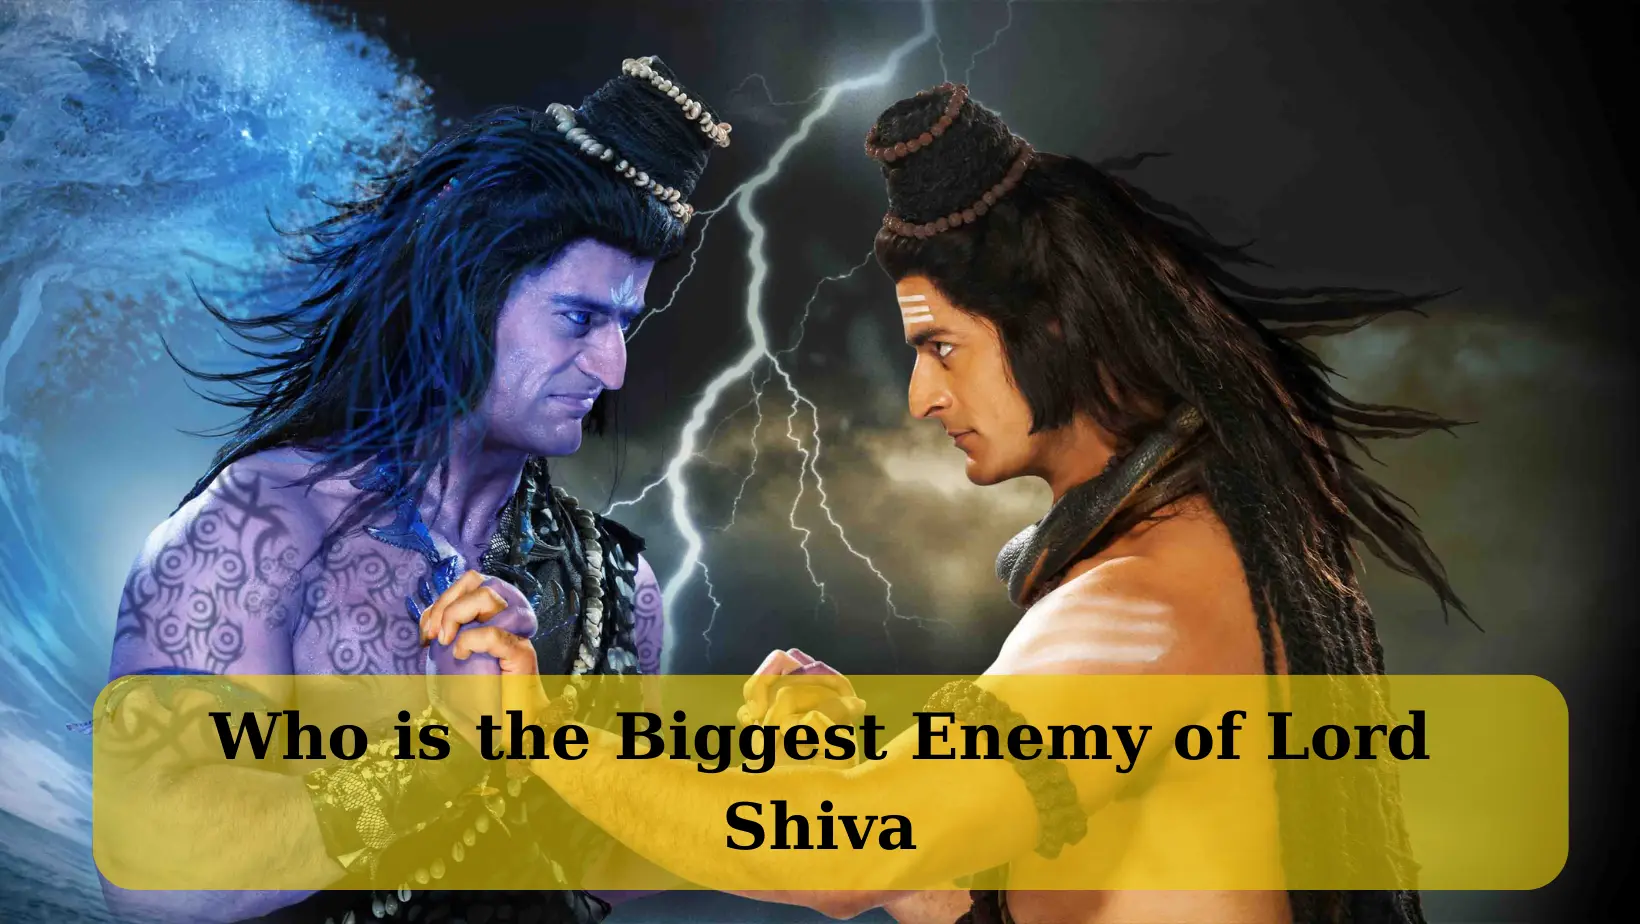 Who is the Biggest Enemy of Lord Shiva